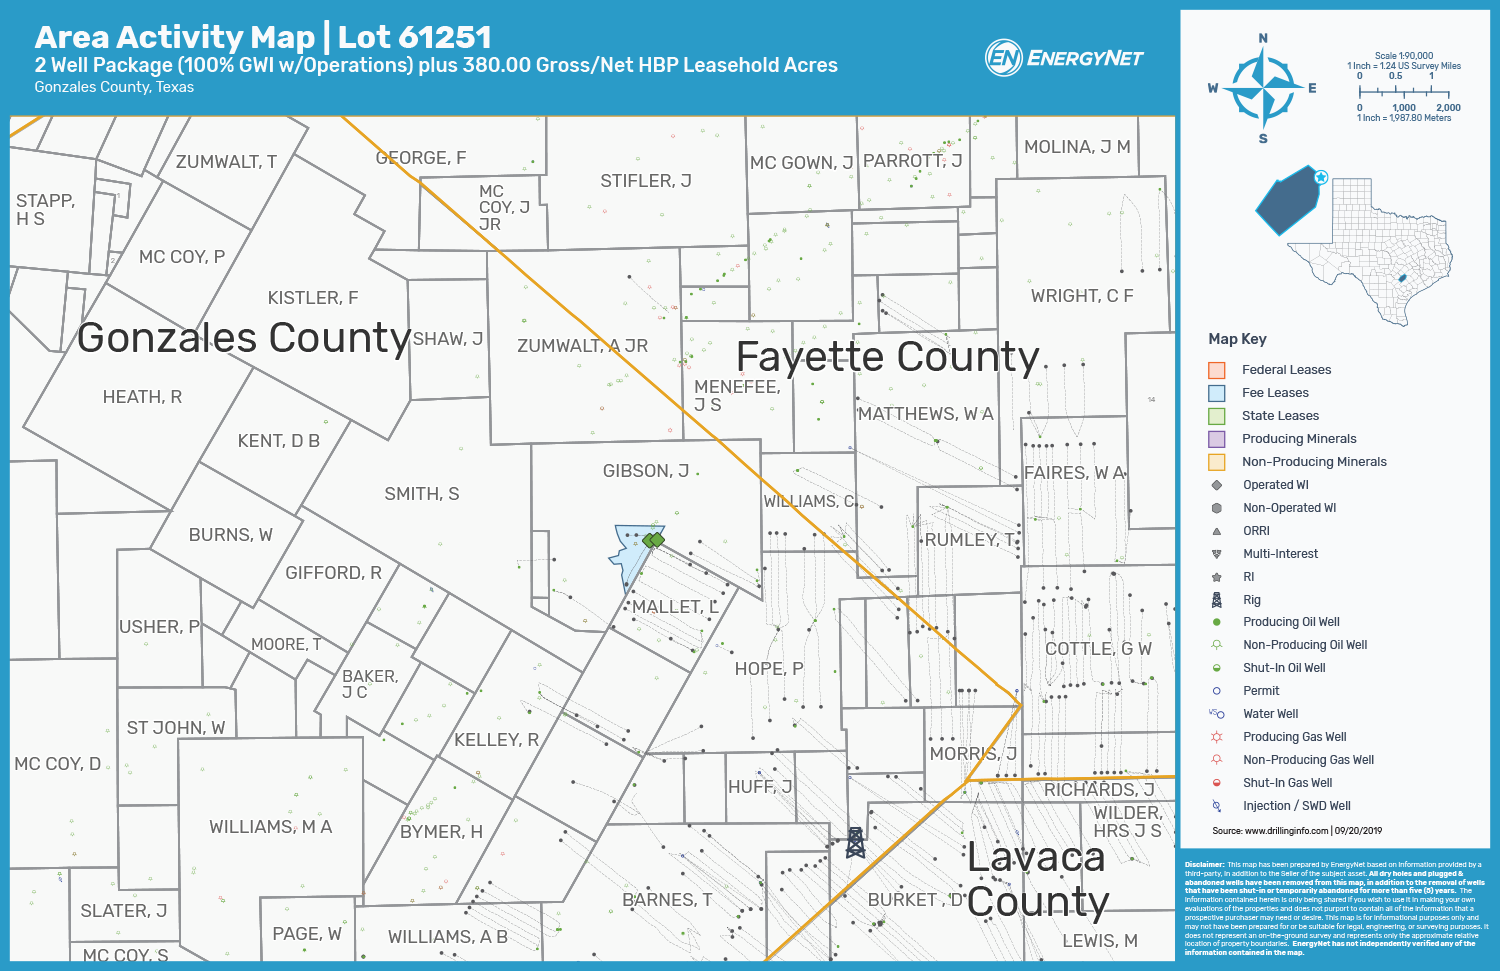 Eagle Ford Shale Opportunity, Gonzales County, Texas Asset Map (Source: EnergyNet)